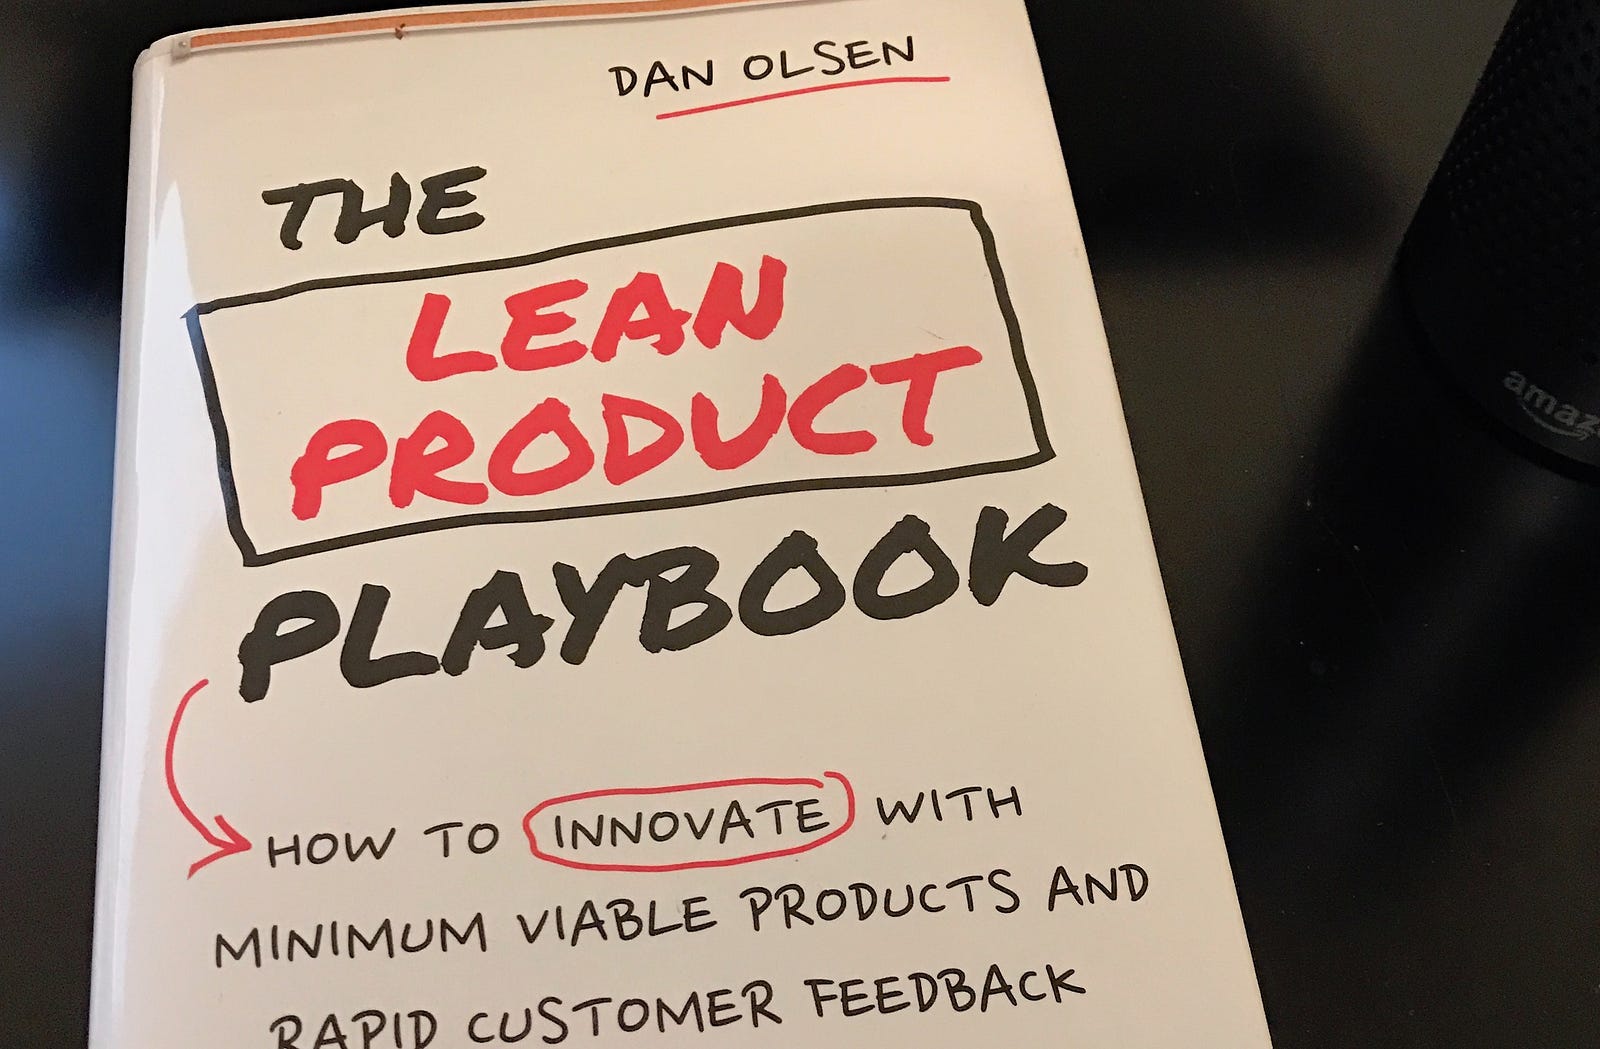 The Lean Product Playbook How to Innovate with Minimum Viable Products
and Rapid Customer Feedback Epub-Ebook